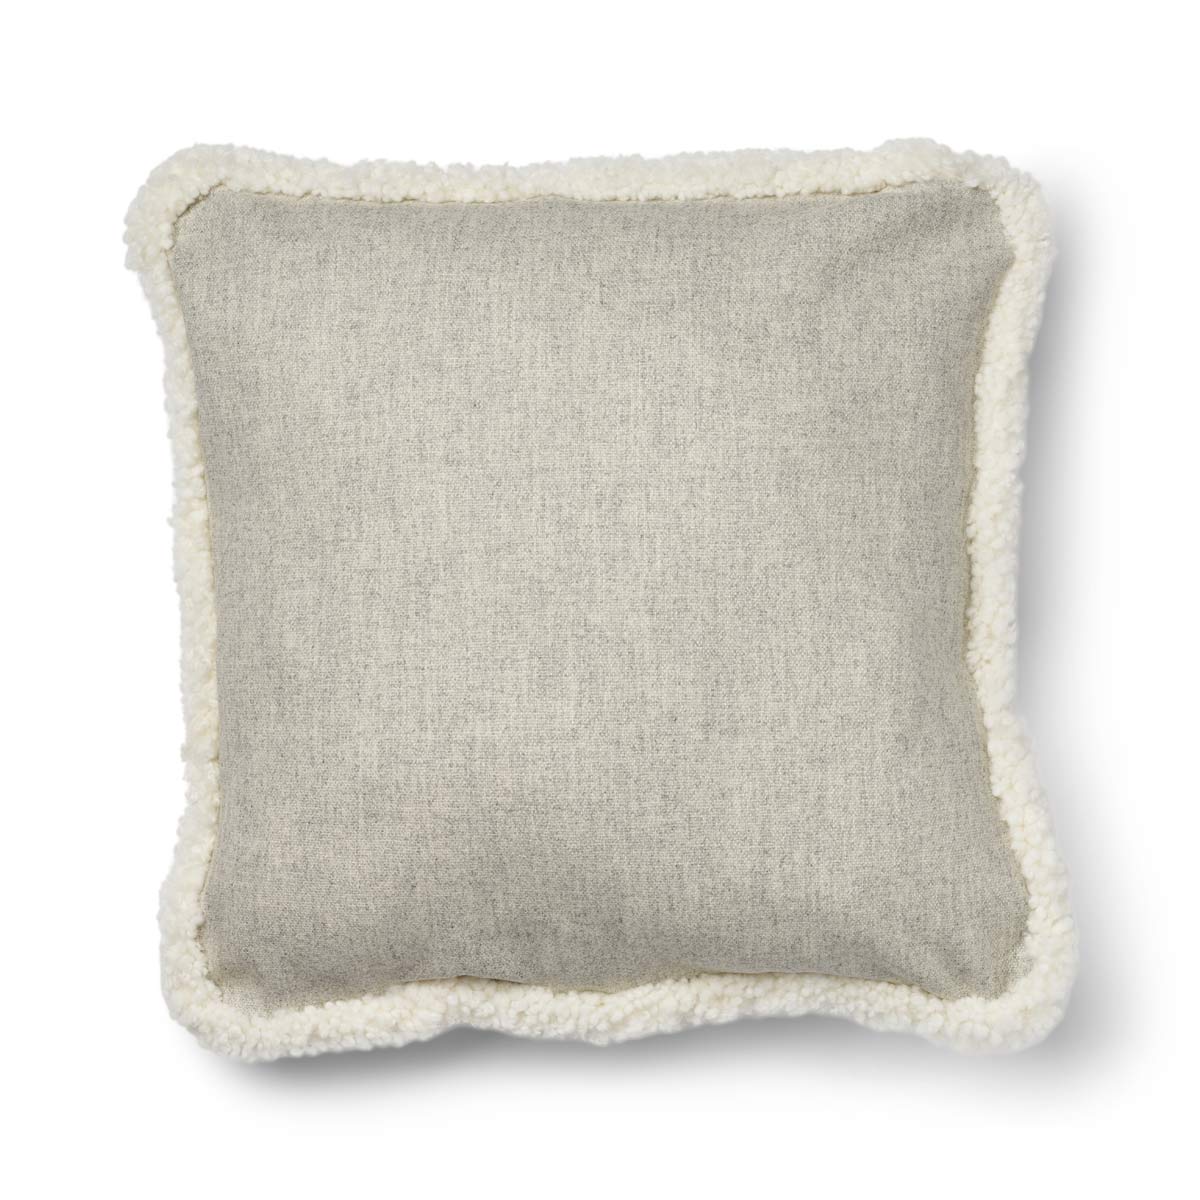 Classic Collection, Doublesided 100 % Wool Cushion and SW New Zealand Sheepskin Trimming. Size: 52x52 cm.